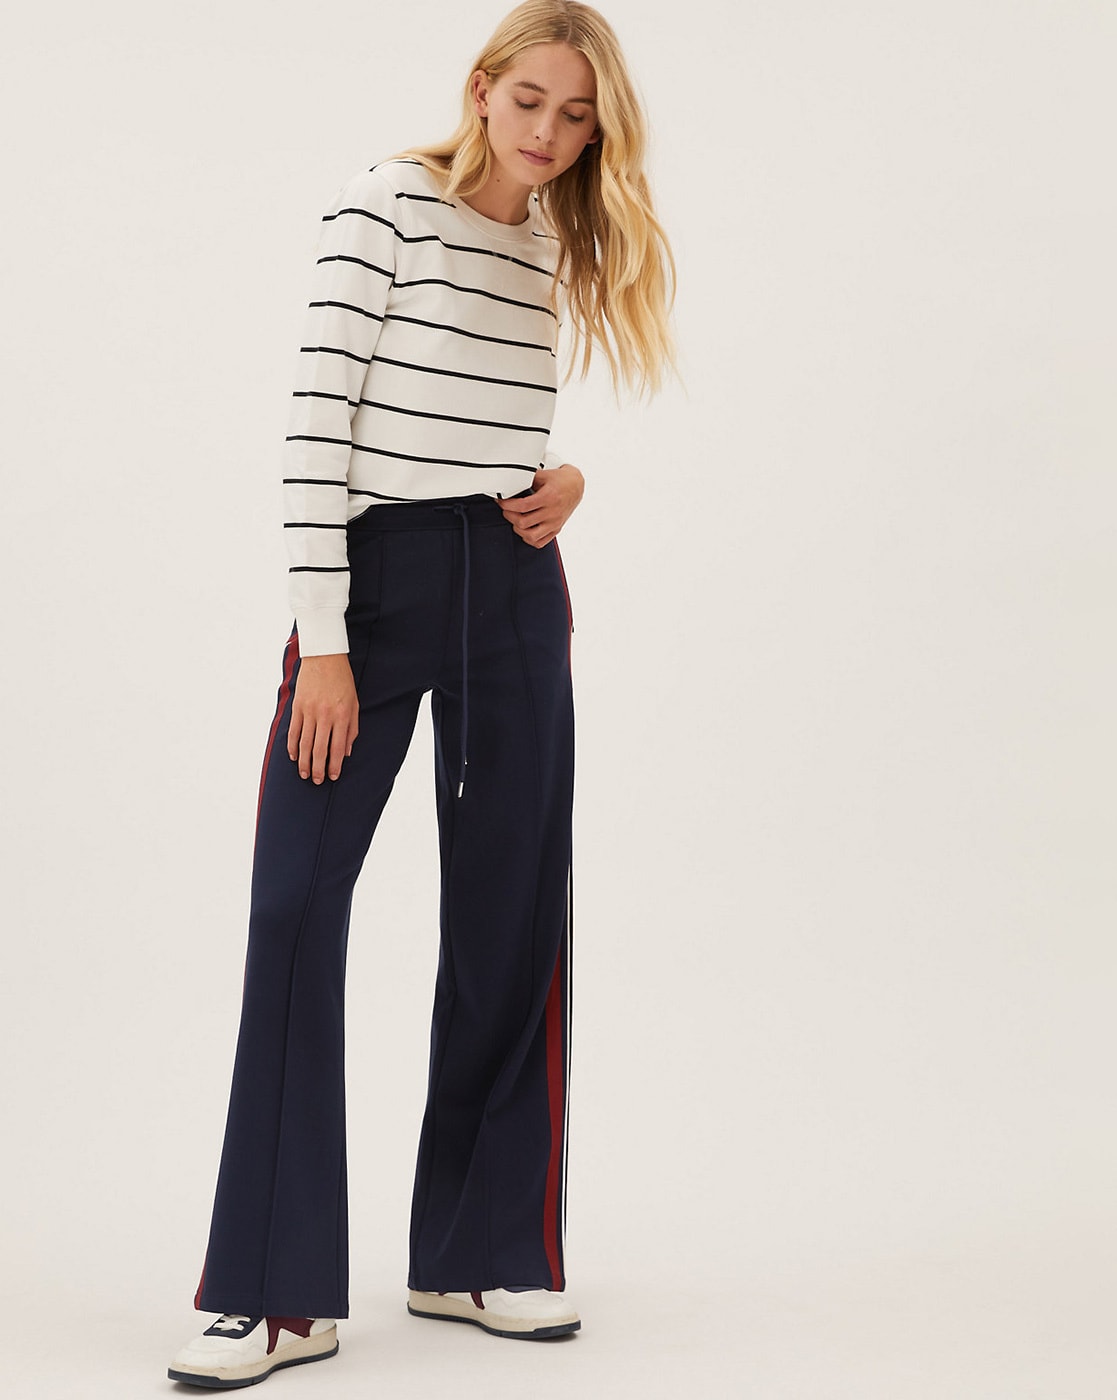 Same Pattern, Different Bodies: Peppermint Wide Leg Pants